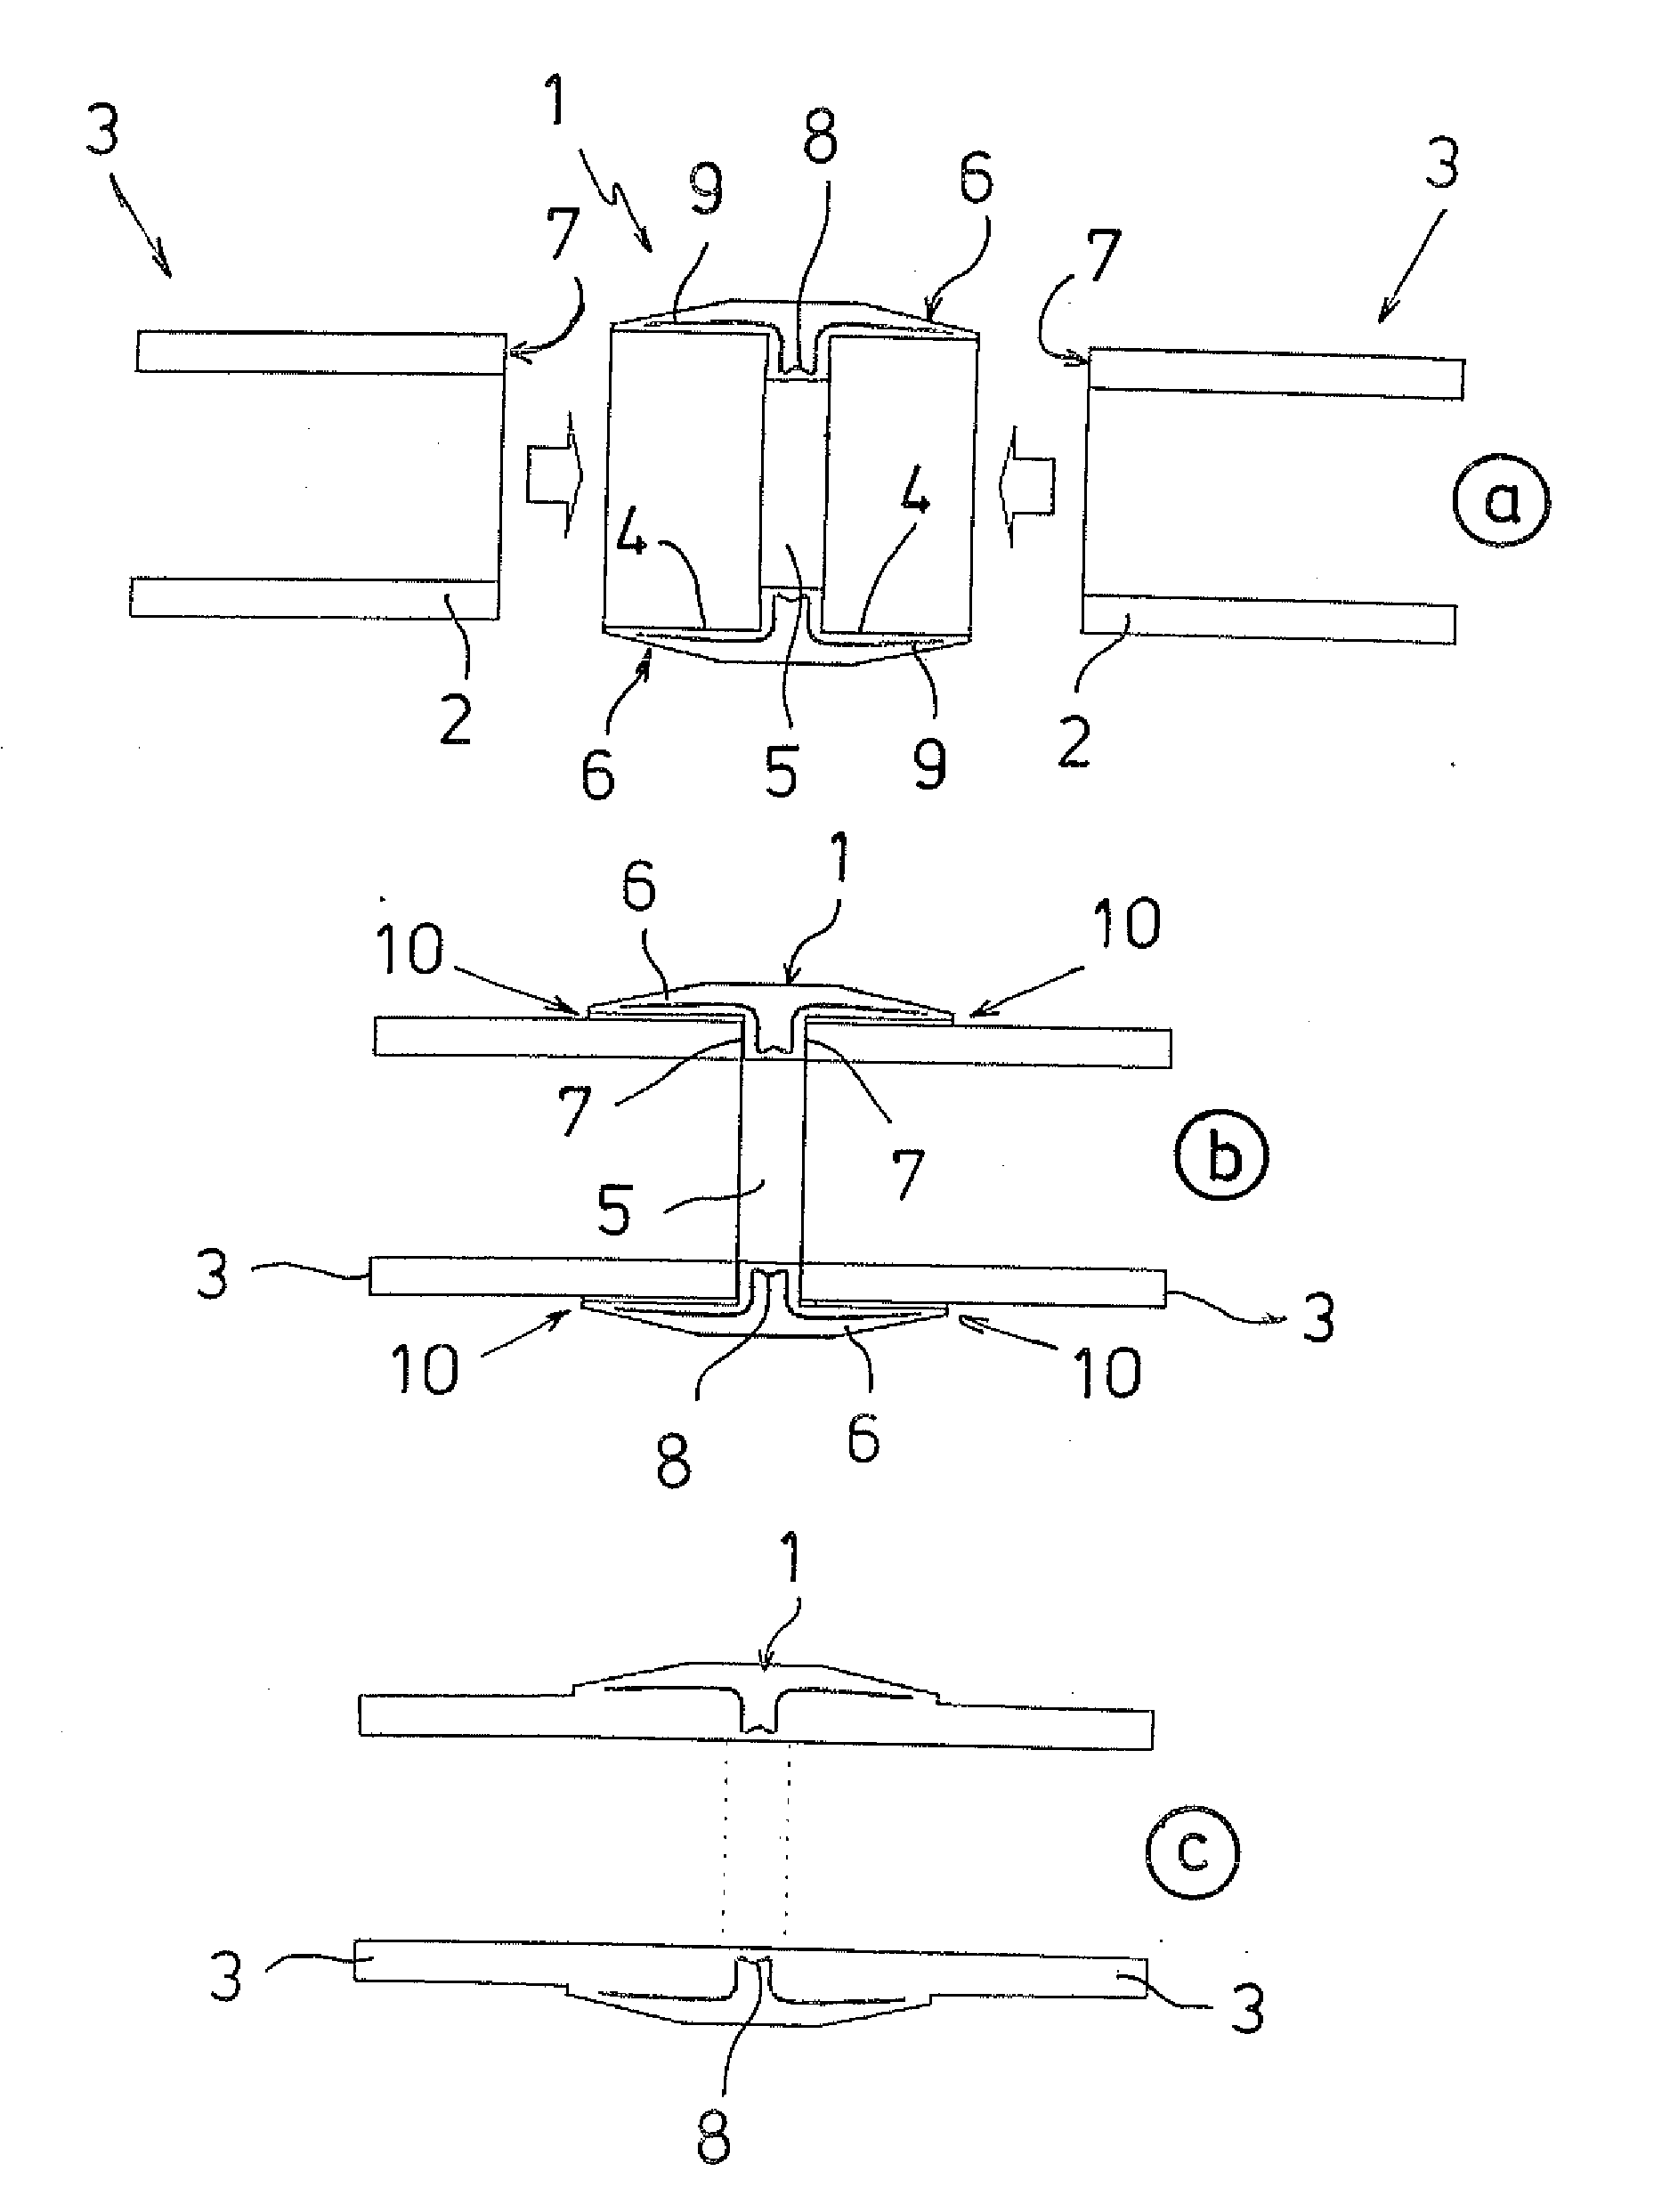 Induction connecting sleeve for connecting weldable thermoplastic elements by means of fusion